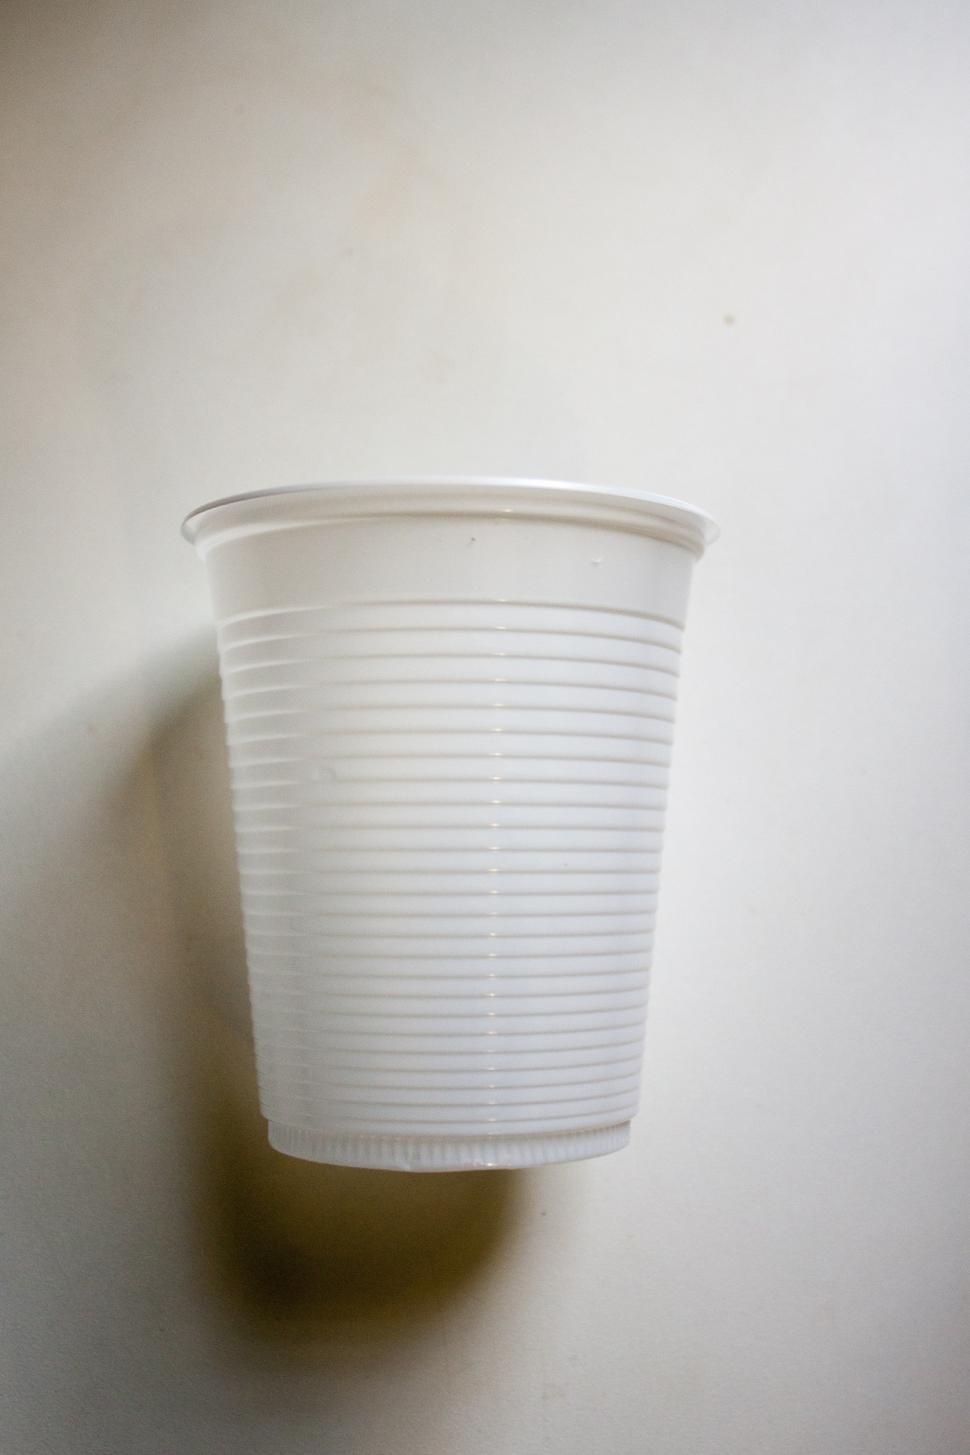 Free Image of Disposable plastic cup 